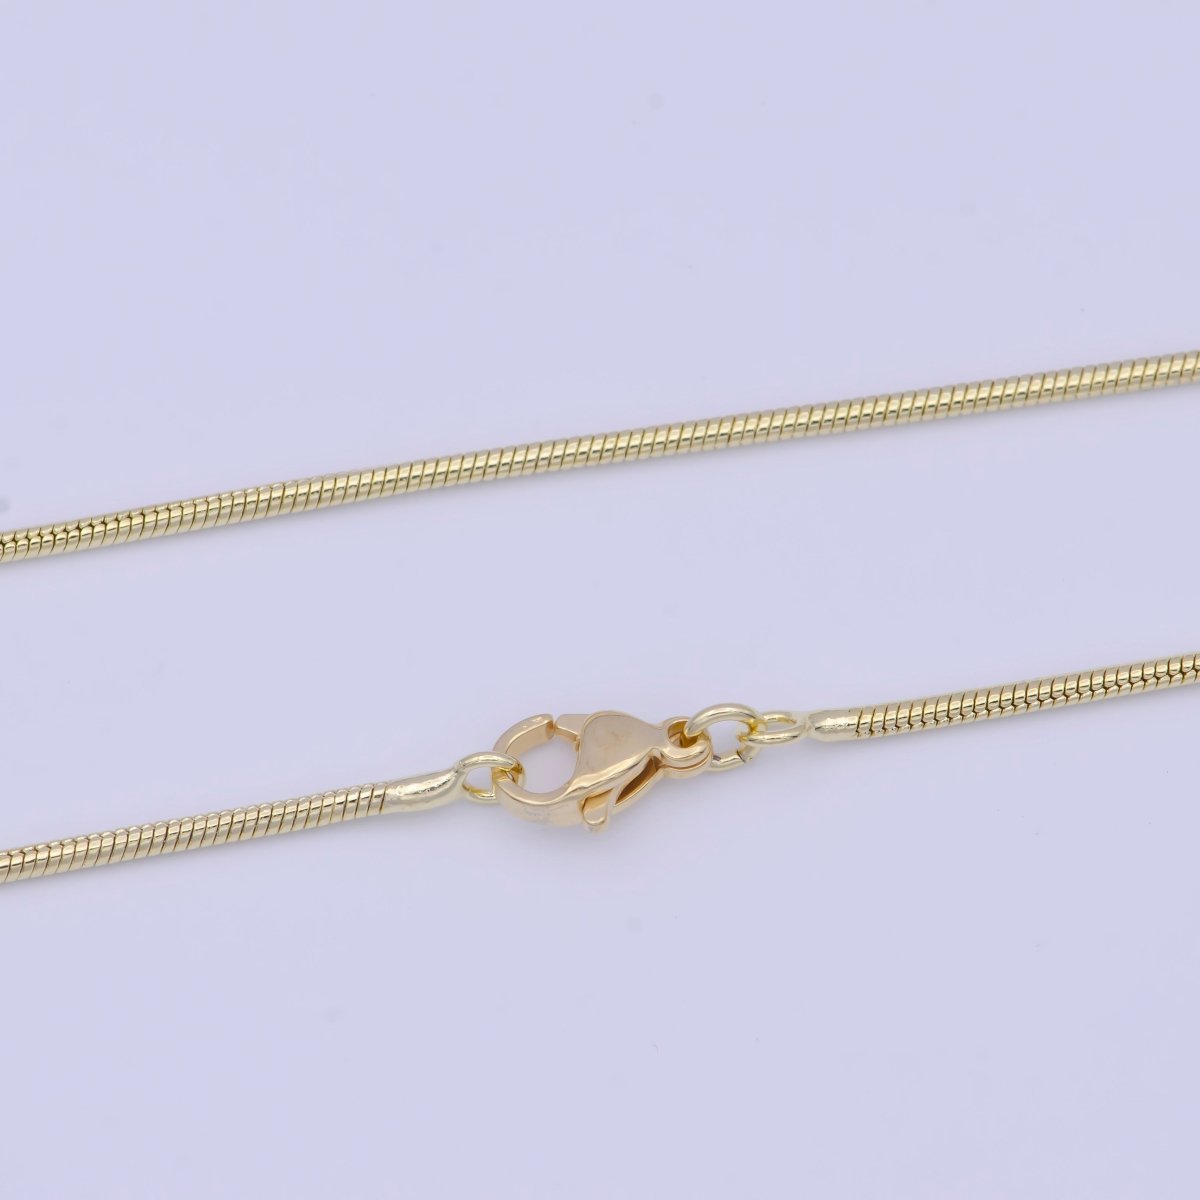 Dainty Gold Snake Chain Necklace, Layer Herringbone Necklace Ready to Wear 17.8 Inch | WA-1107 Clearance Pricing - DLUXCA